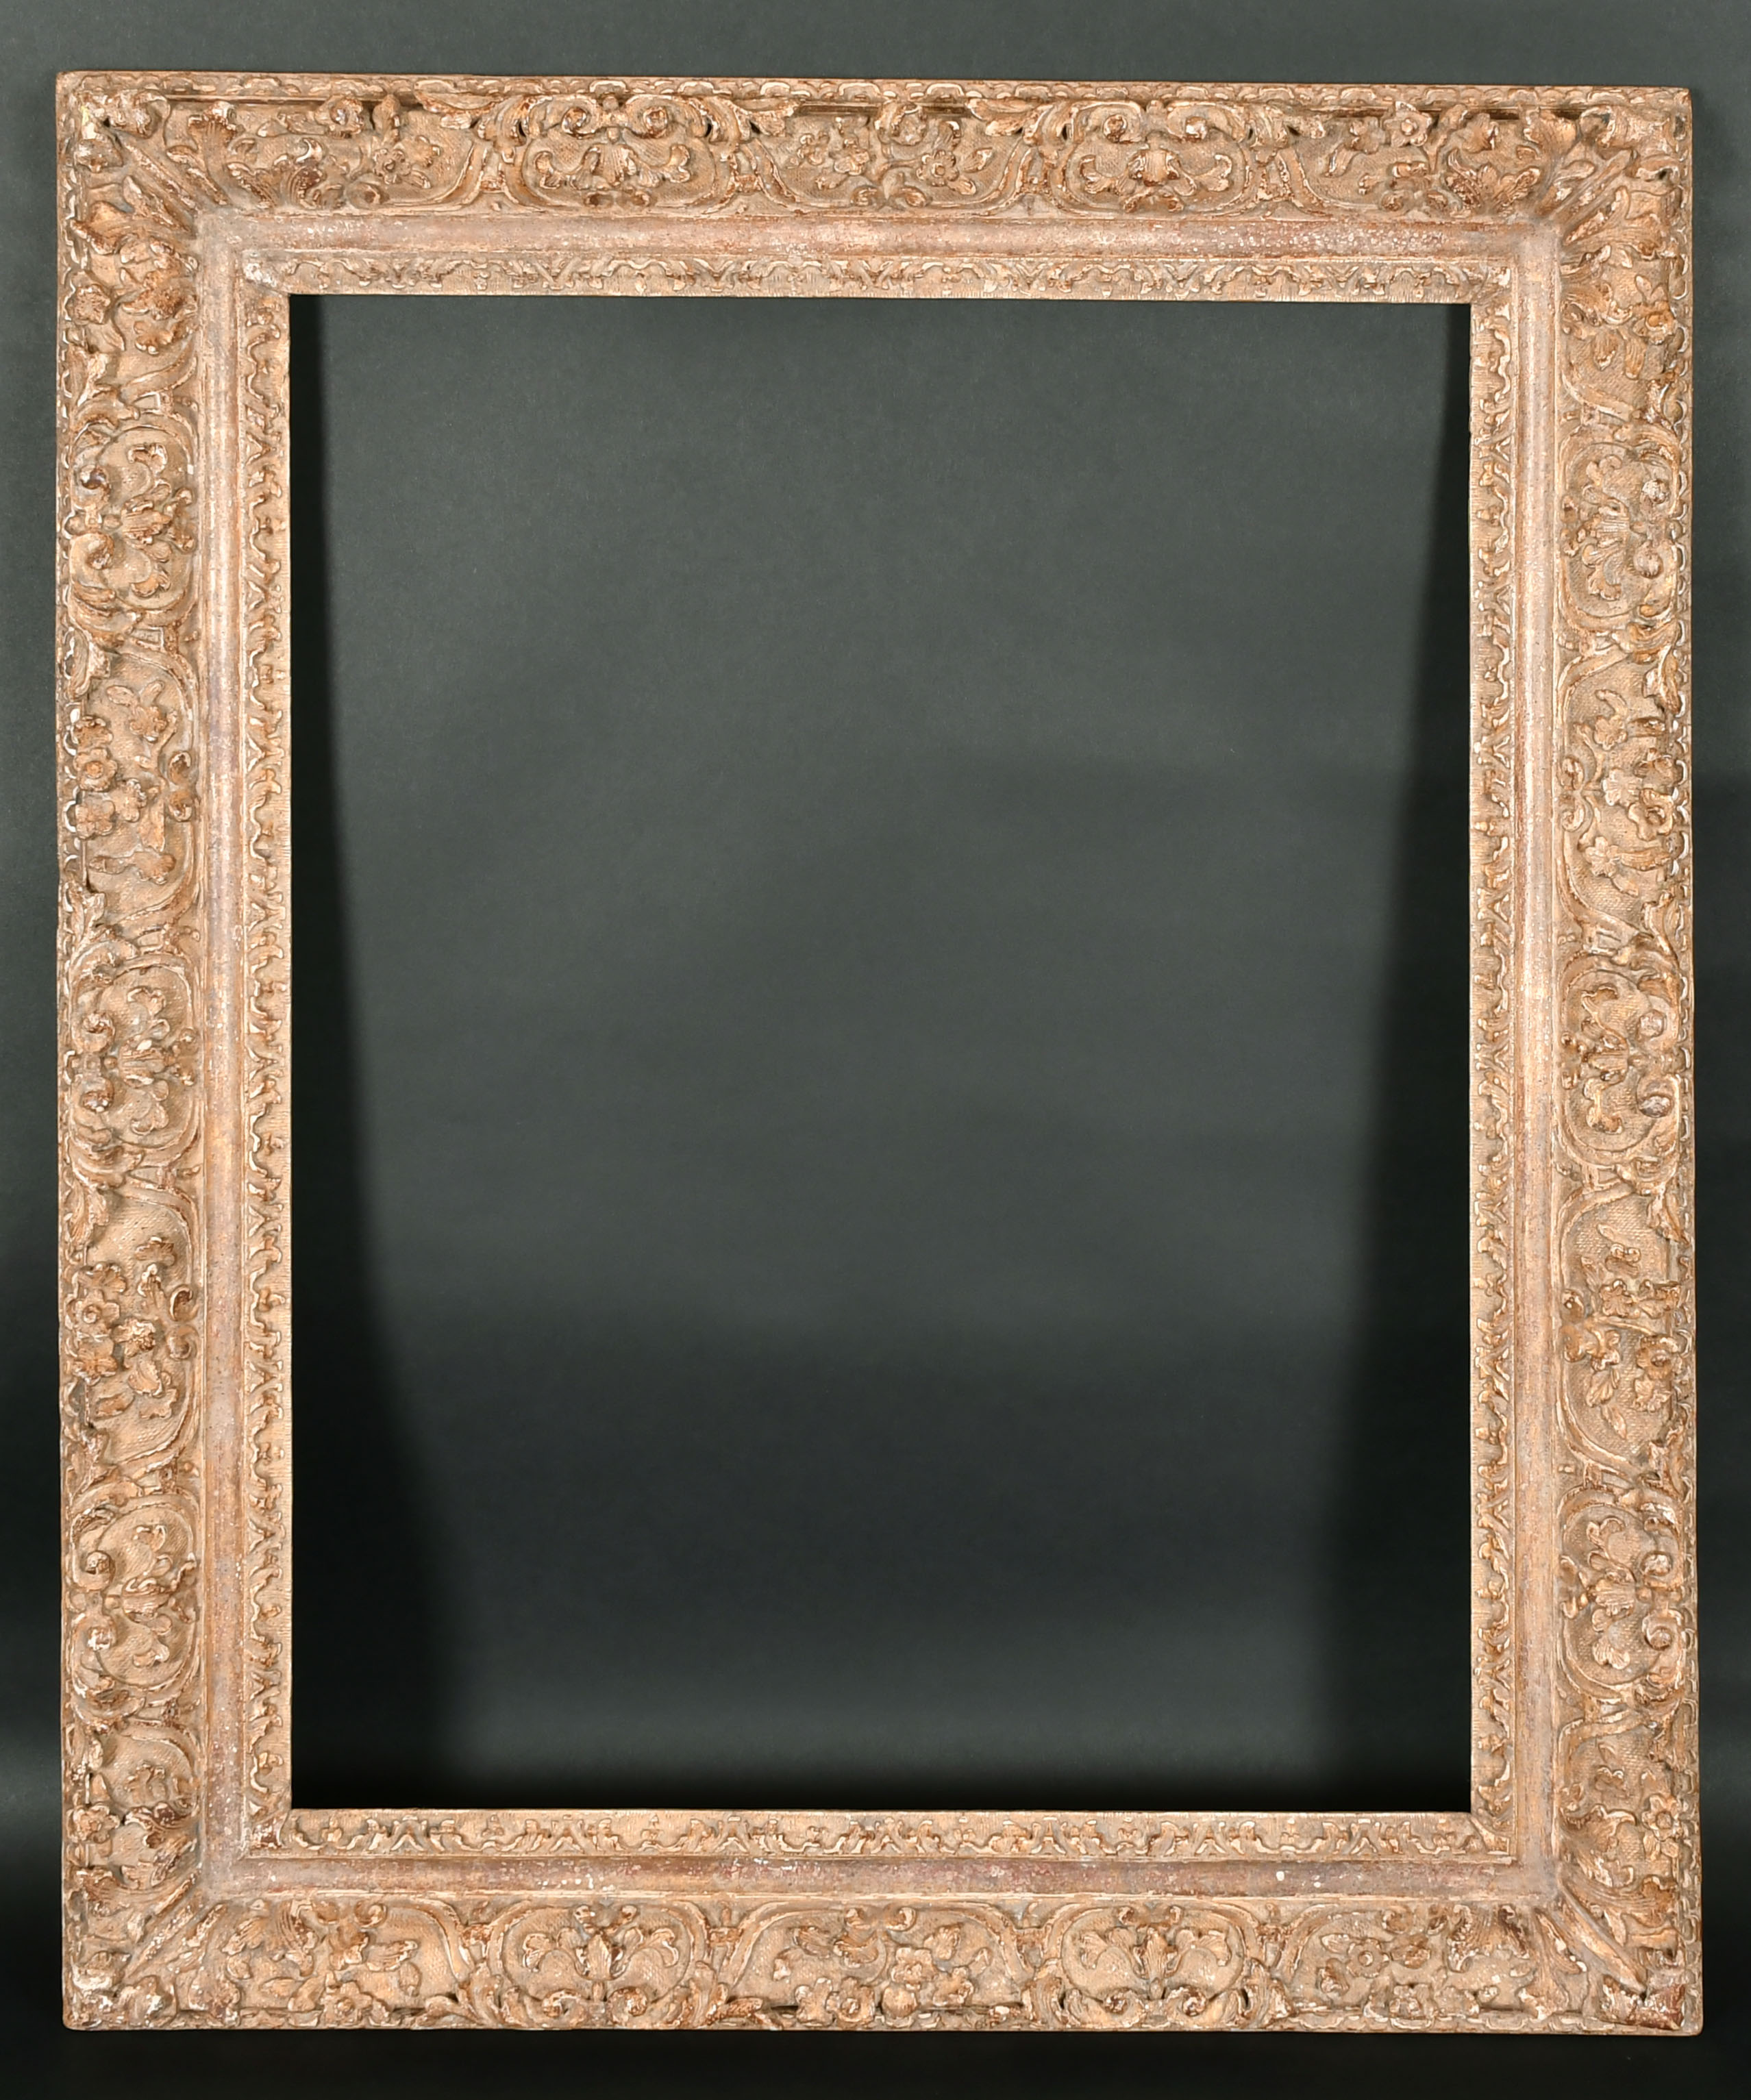 Late 18th Century French School. A Carved Giltwood Frame, rebate 25" x 19" (63.5 x 48.2cm) - Image 2 of 3